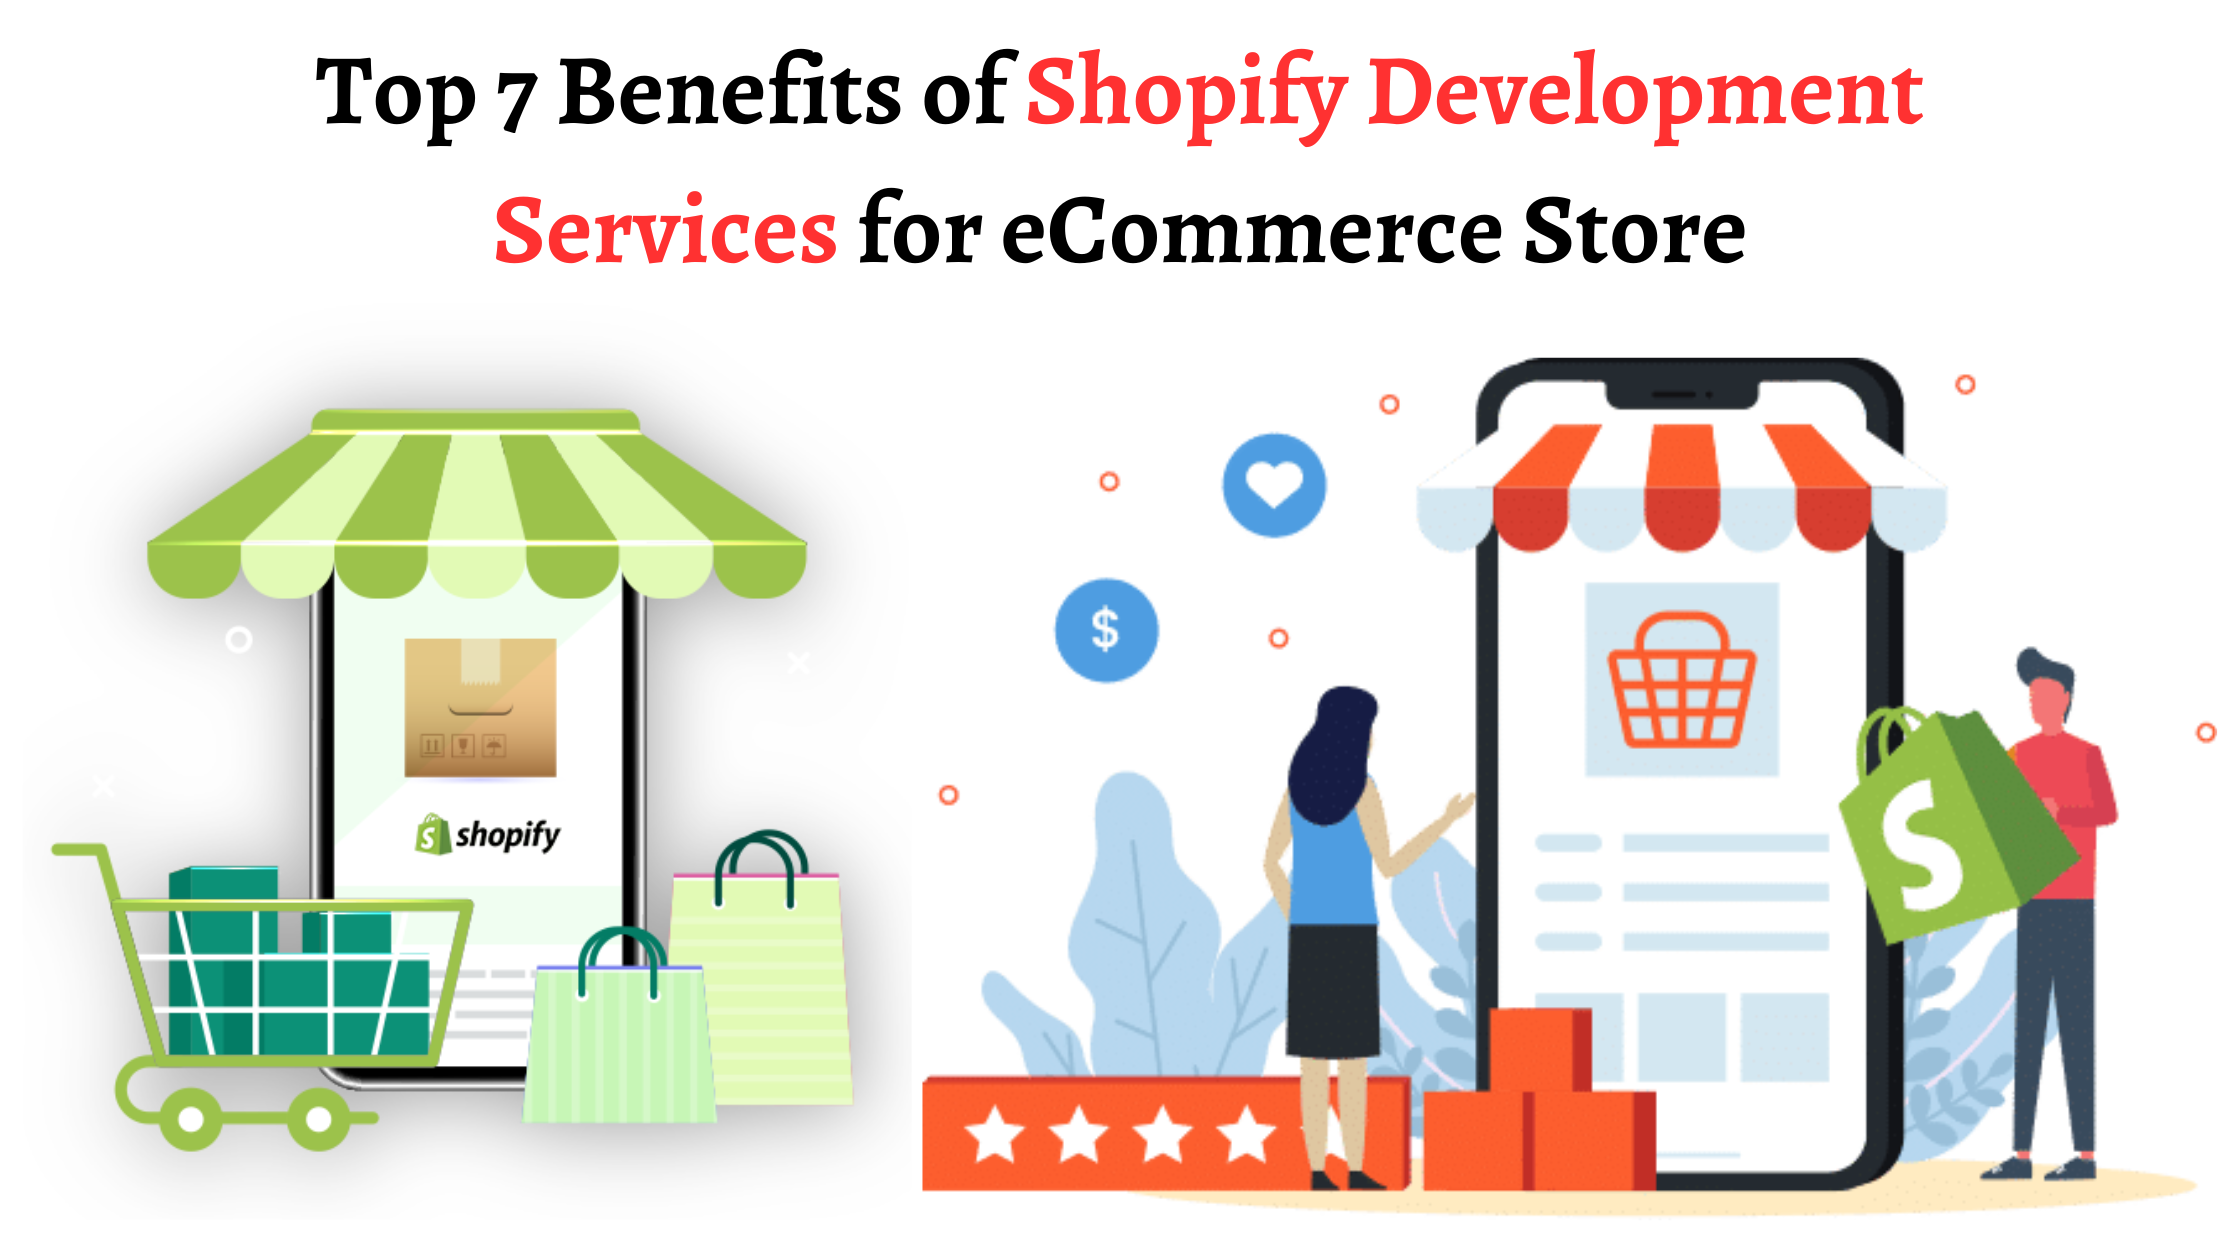 Top 7 Benefits of Shopify Development Services for eCommerce Store